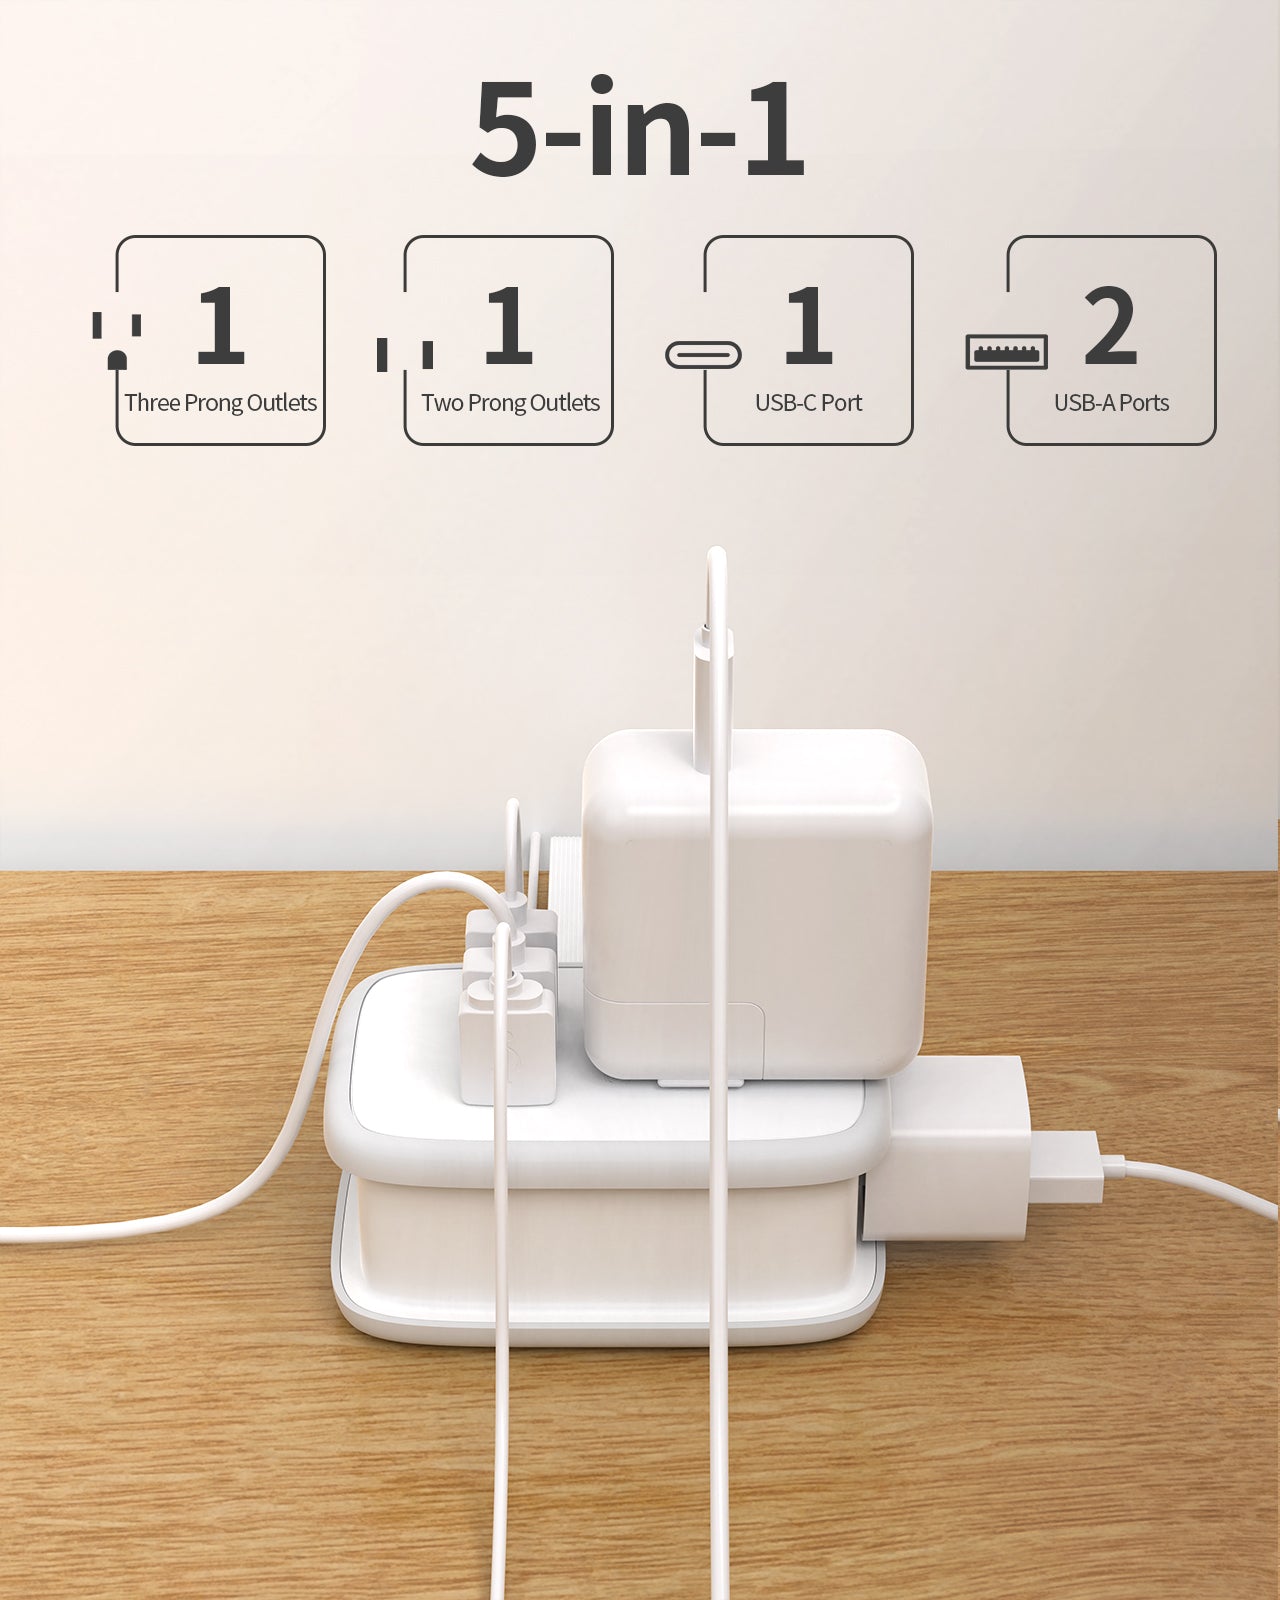 Ntonpower New Pocket Power Strip 2 Outlets 3 USB Ports